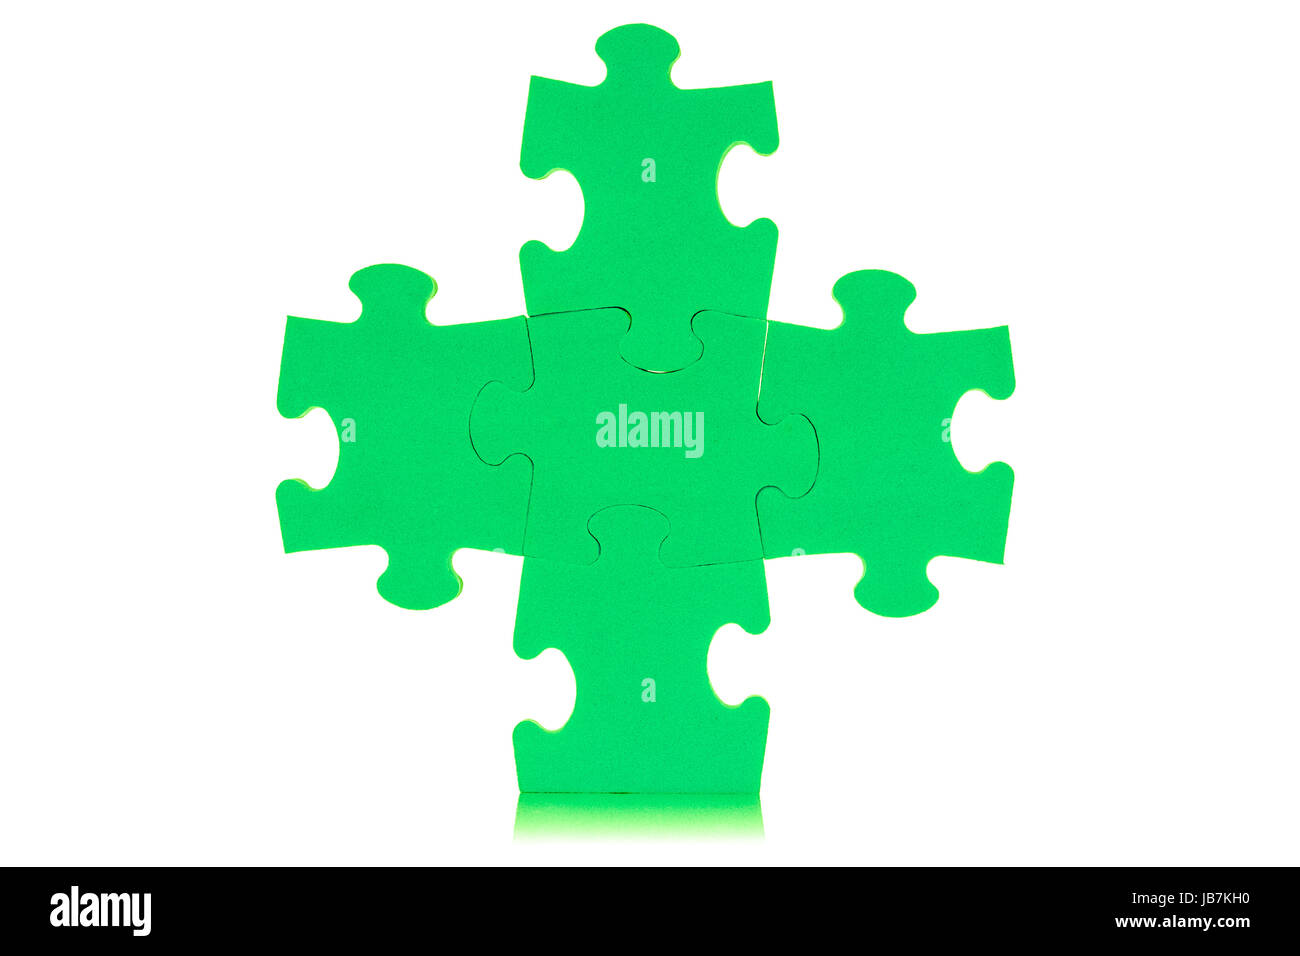 Five attached green puzzles, isolated over white background Stock Photo